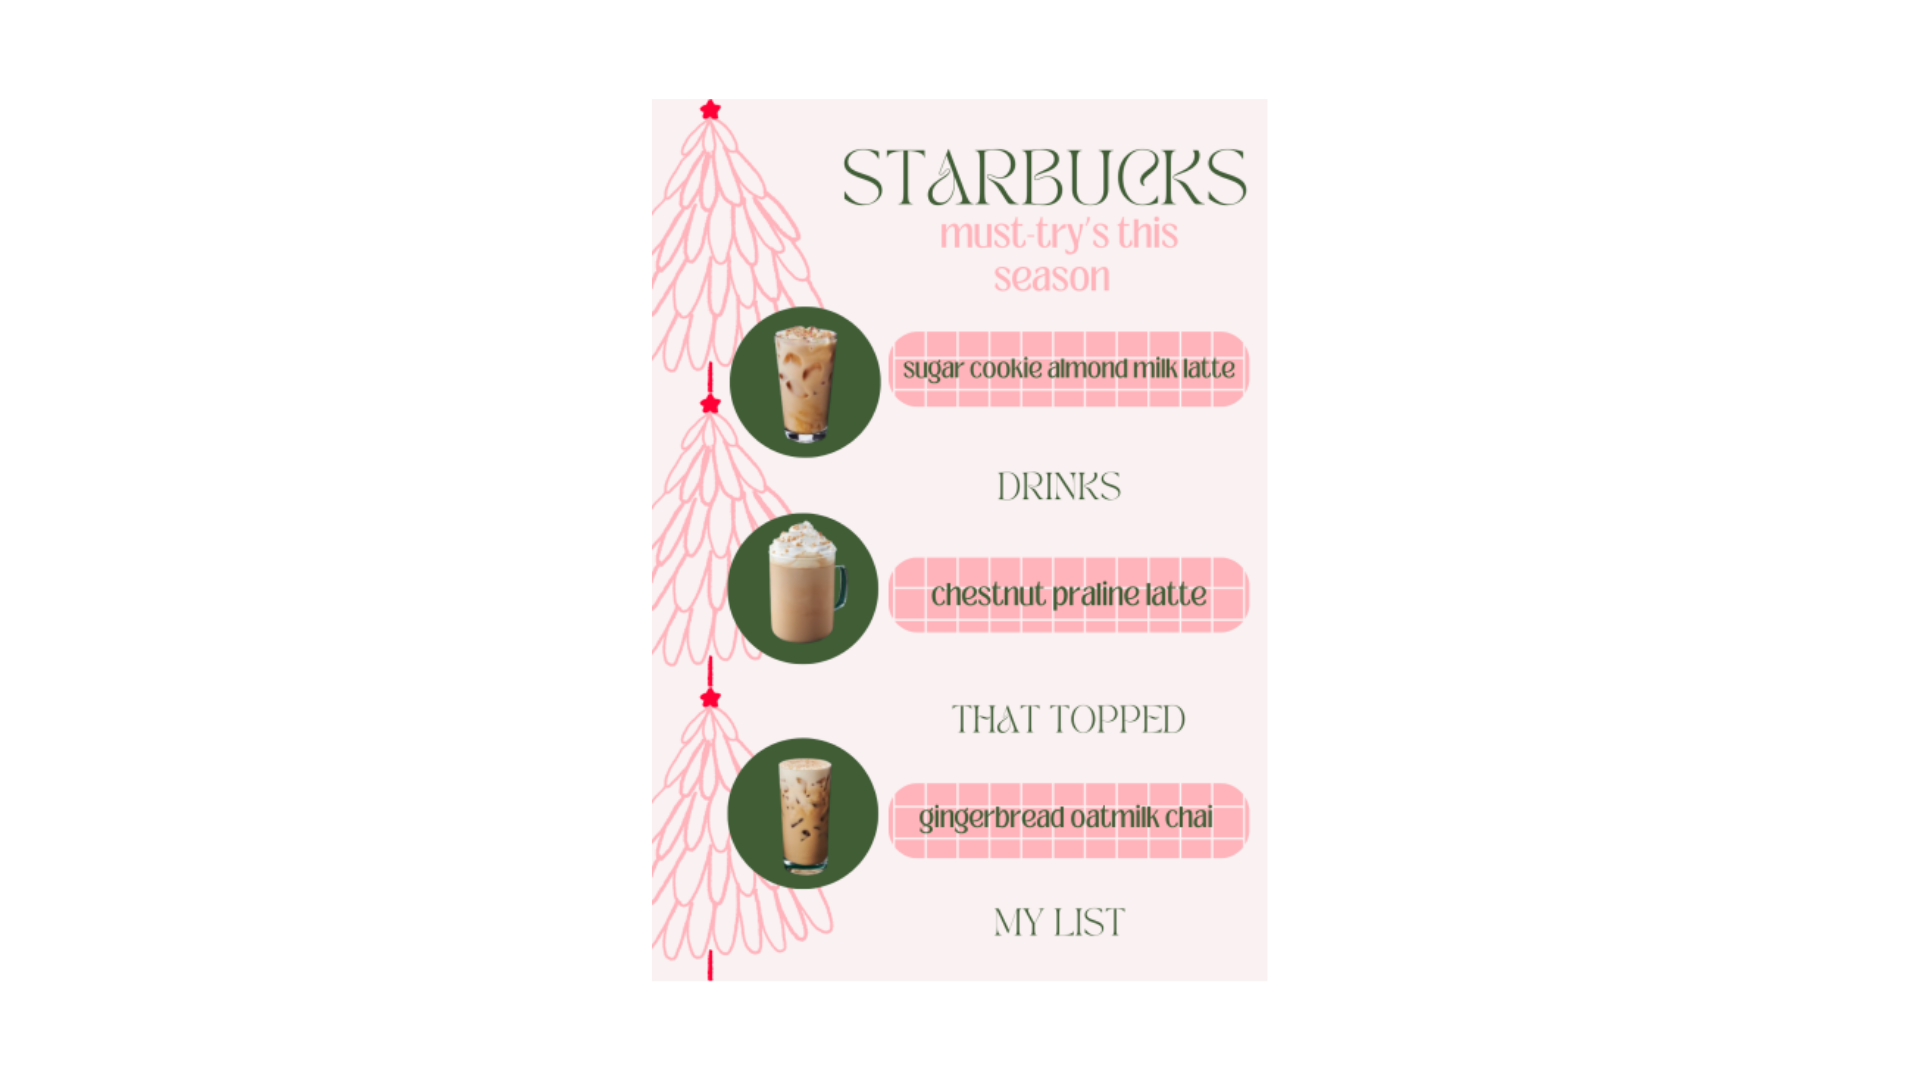 Starbucks Holiday Menu on an infographic made on Canva.